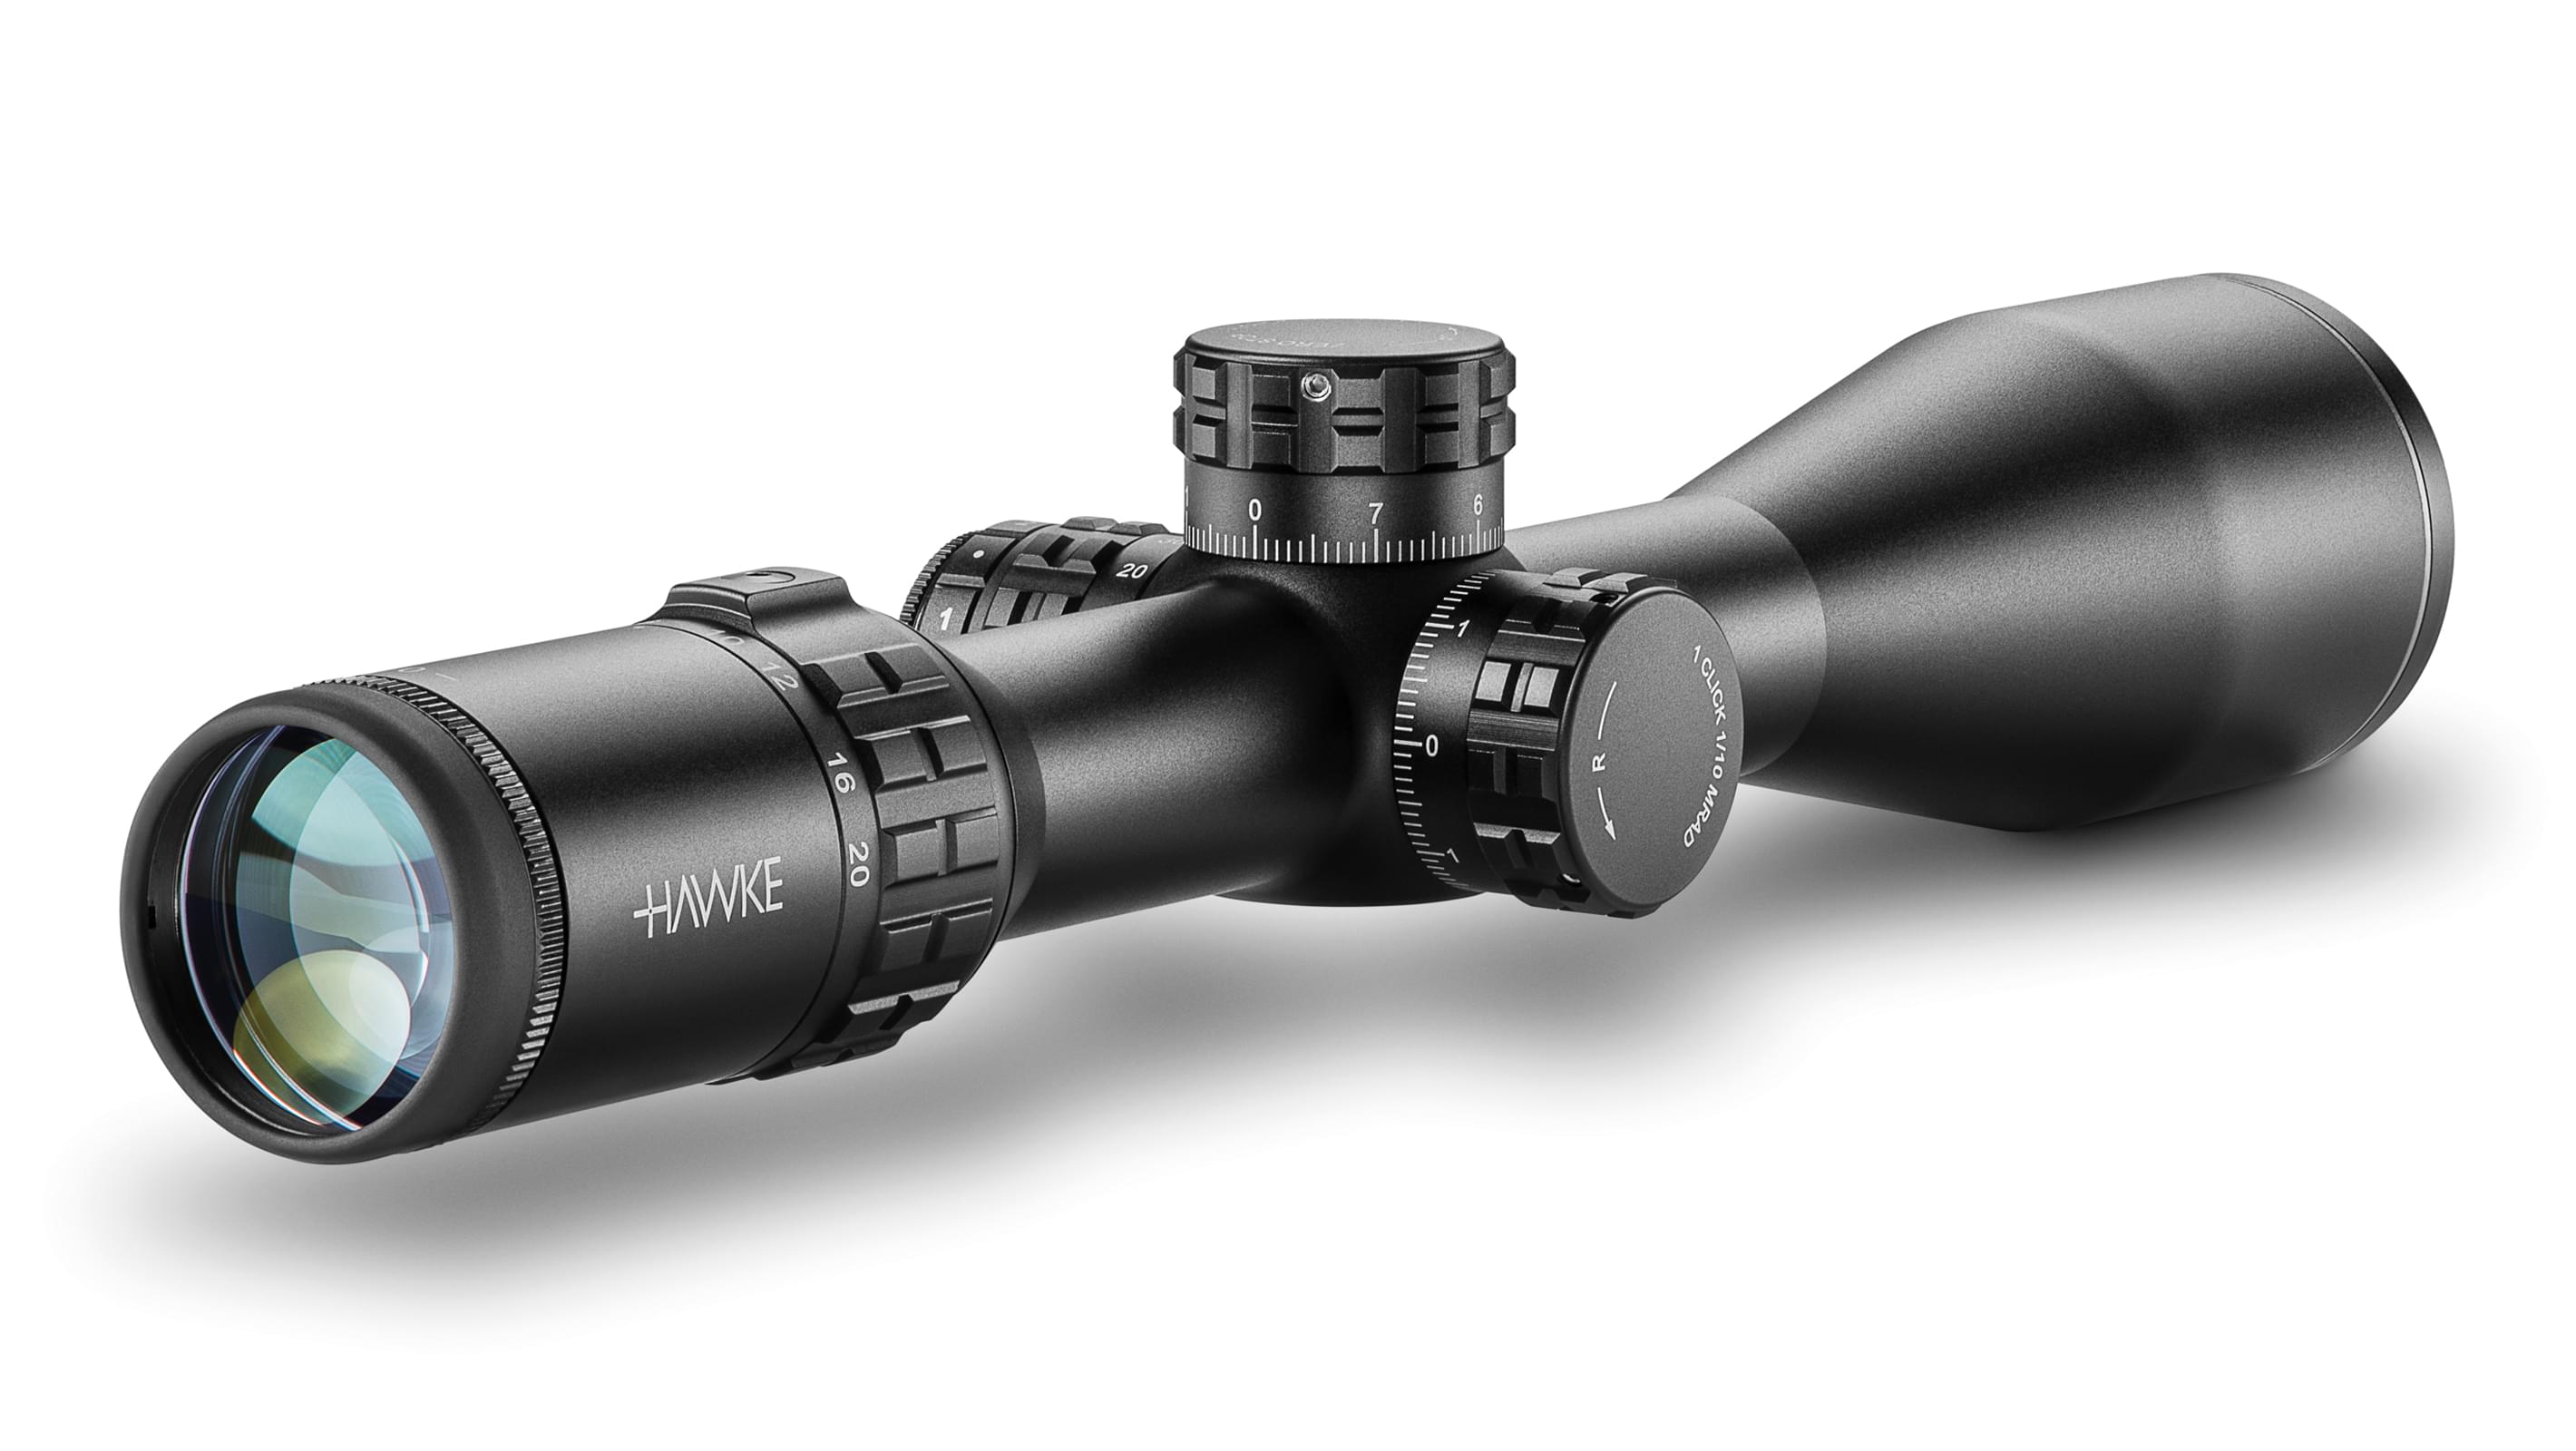 Ocular End View Of The Hawke Frontier 30 FFP 4-20x50 Mil Pro Rifle Scope